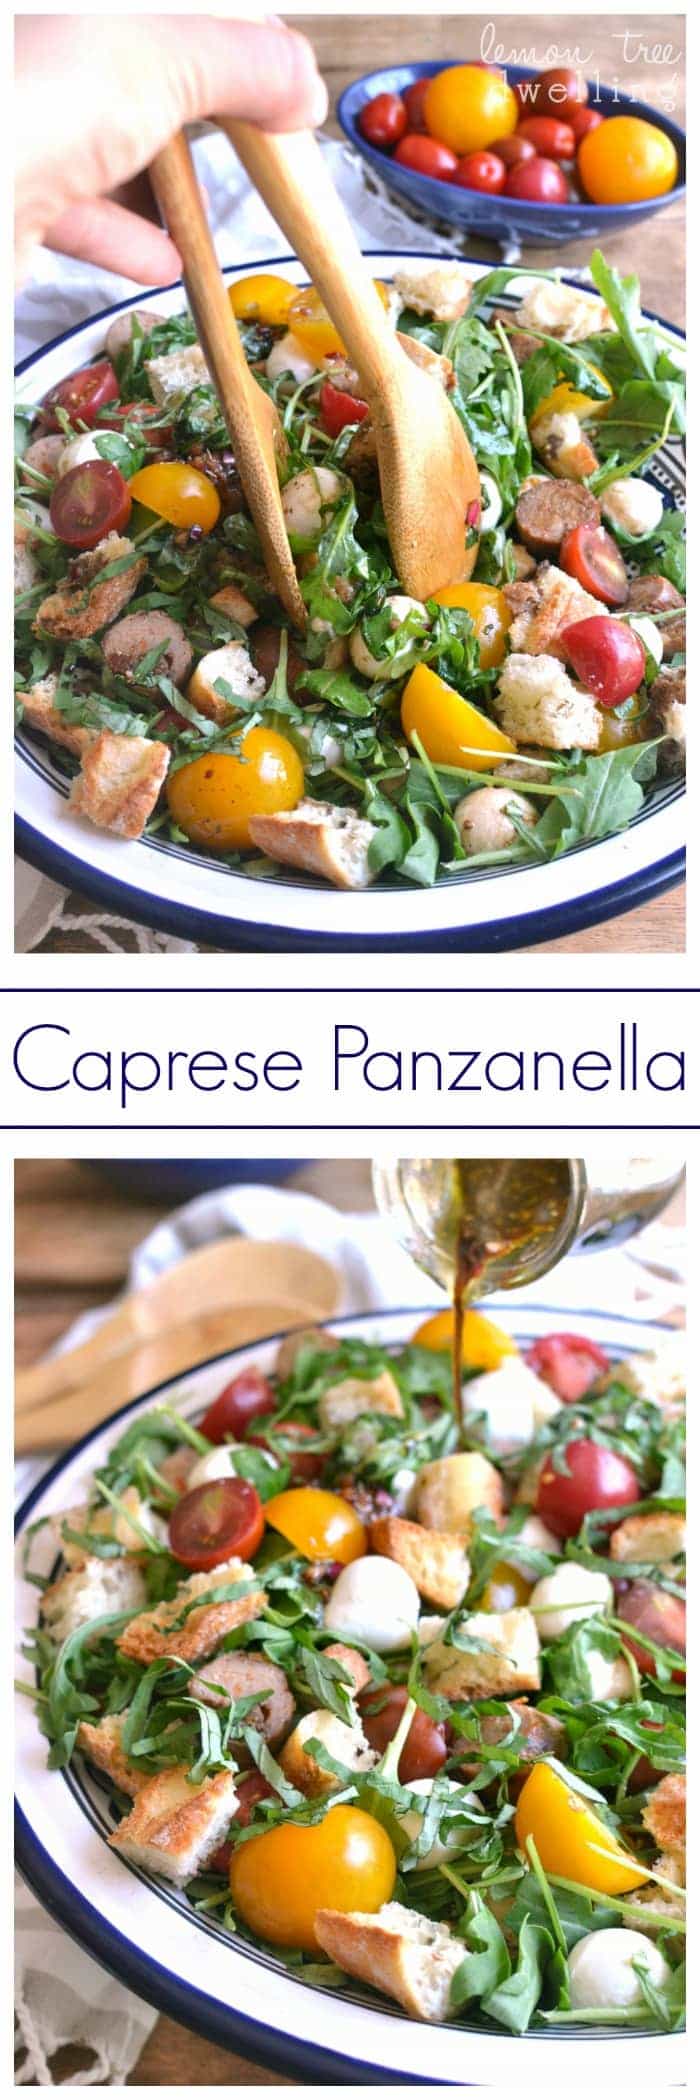 This Caprese Panzanella combines fresh arugula and crusty bread with multicolored tomatoes, fresh mozzarella, Italian sausage, and fresh basil. Drizzle it with homemade balsamic vinaigrette for a light, fresh, flavor-packed summer meal!